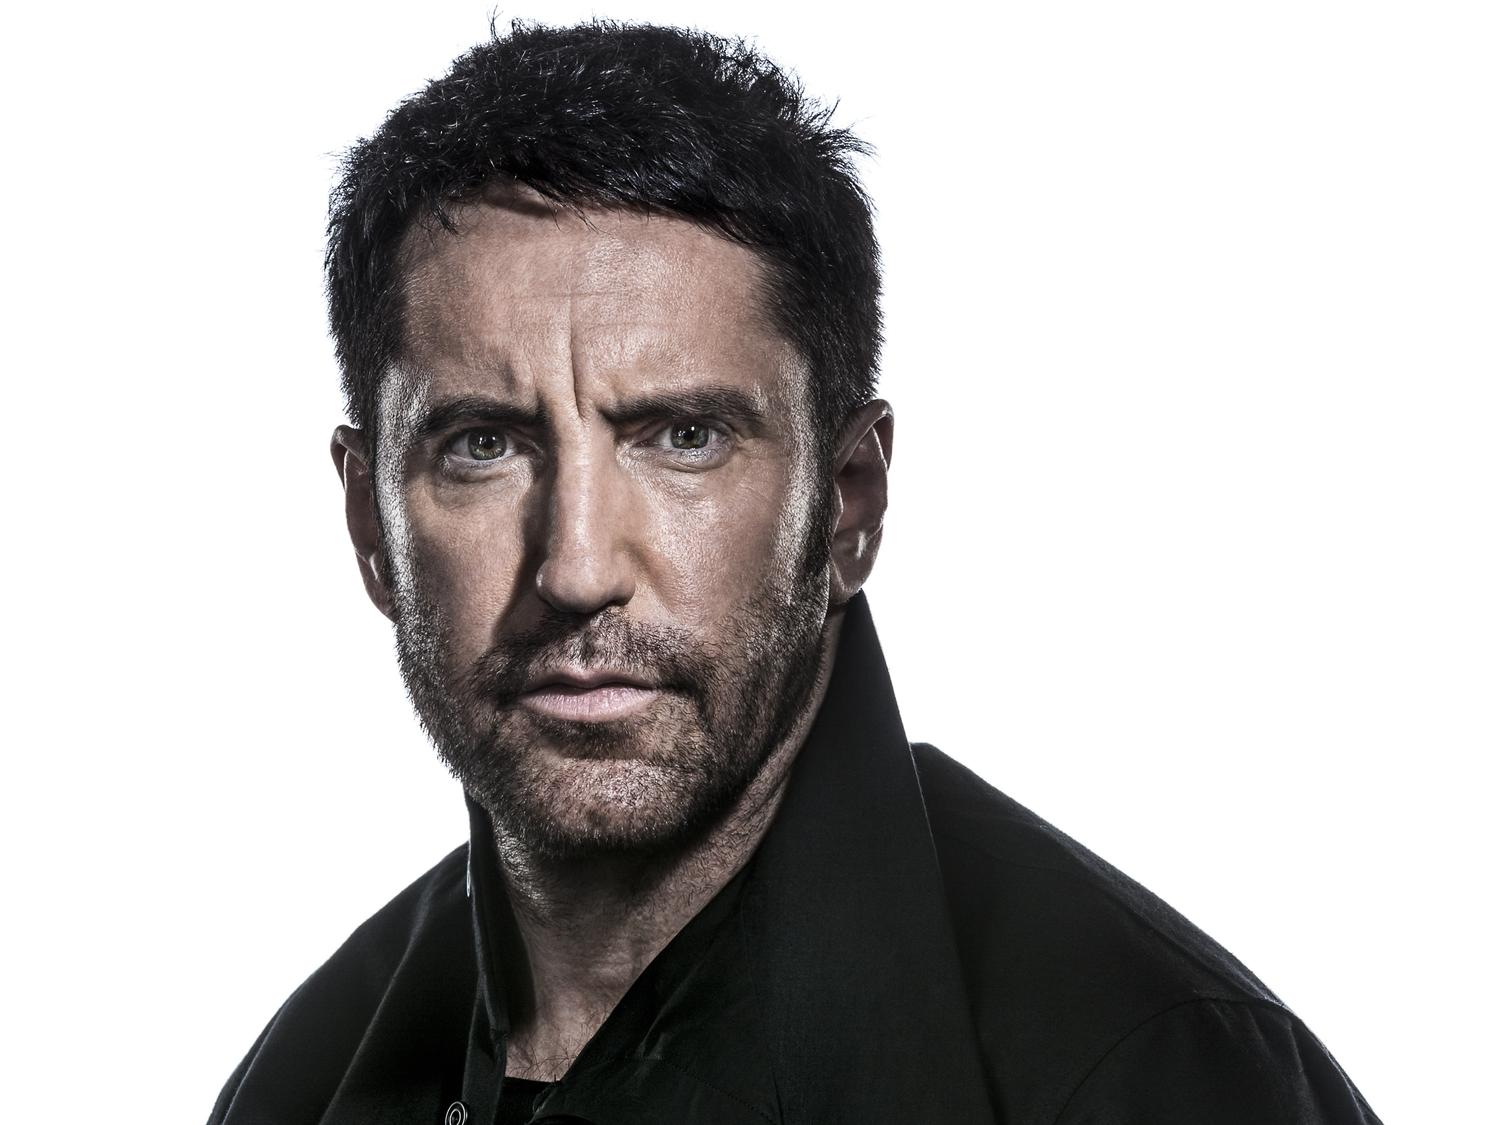 Trent Reznor And Atticus Ross Find The Musicality In Noise With 'Gone Girl'  | Soundcheck | New Sounds